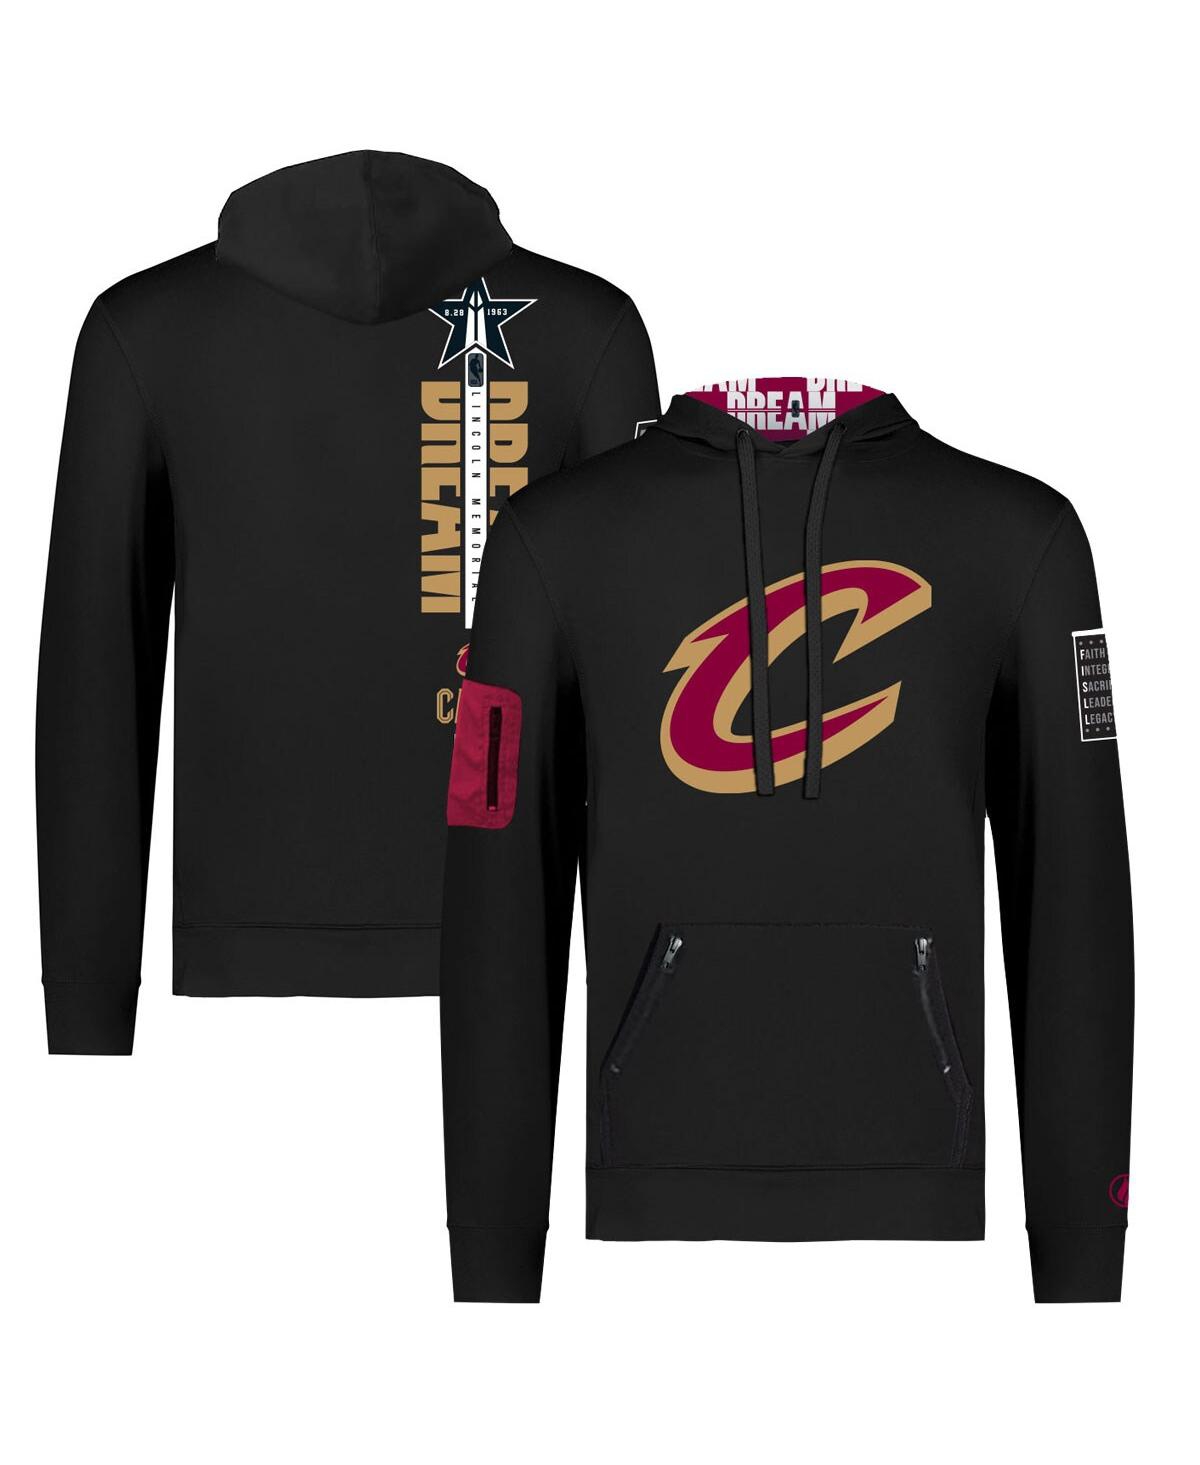 Men's and Women's Fisll x Black History Collection Black Cleveland Cavaliers Pullover Hoodie - Black